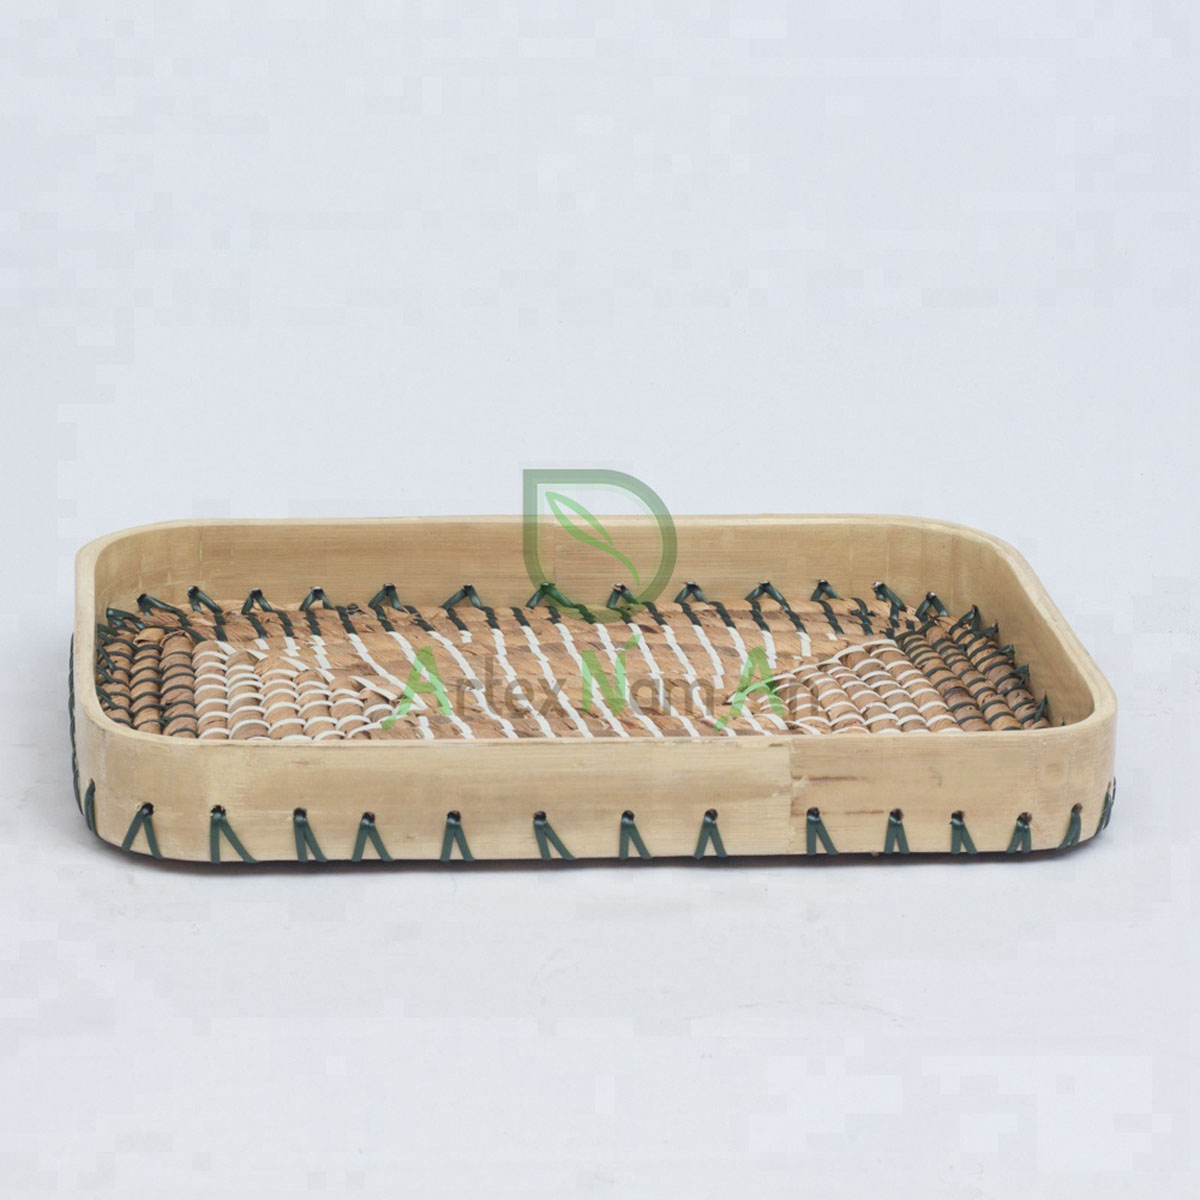 Round Seagrass Decorative Tray With Pattern Also Trays Basket SG 09 03 047 01